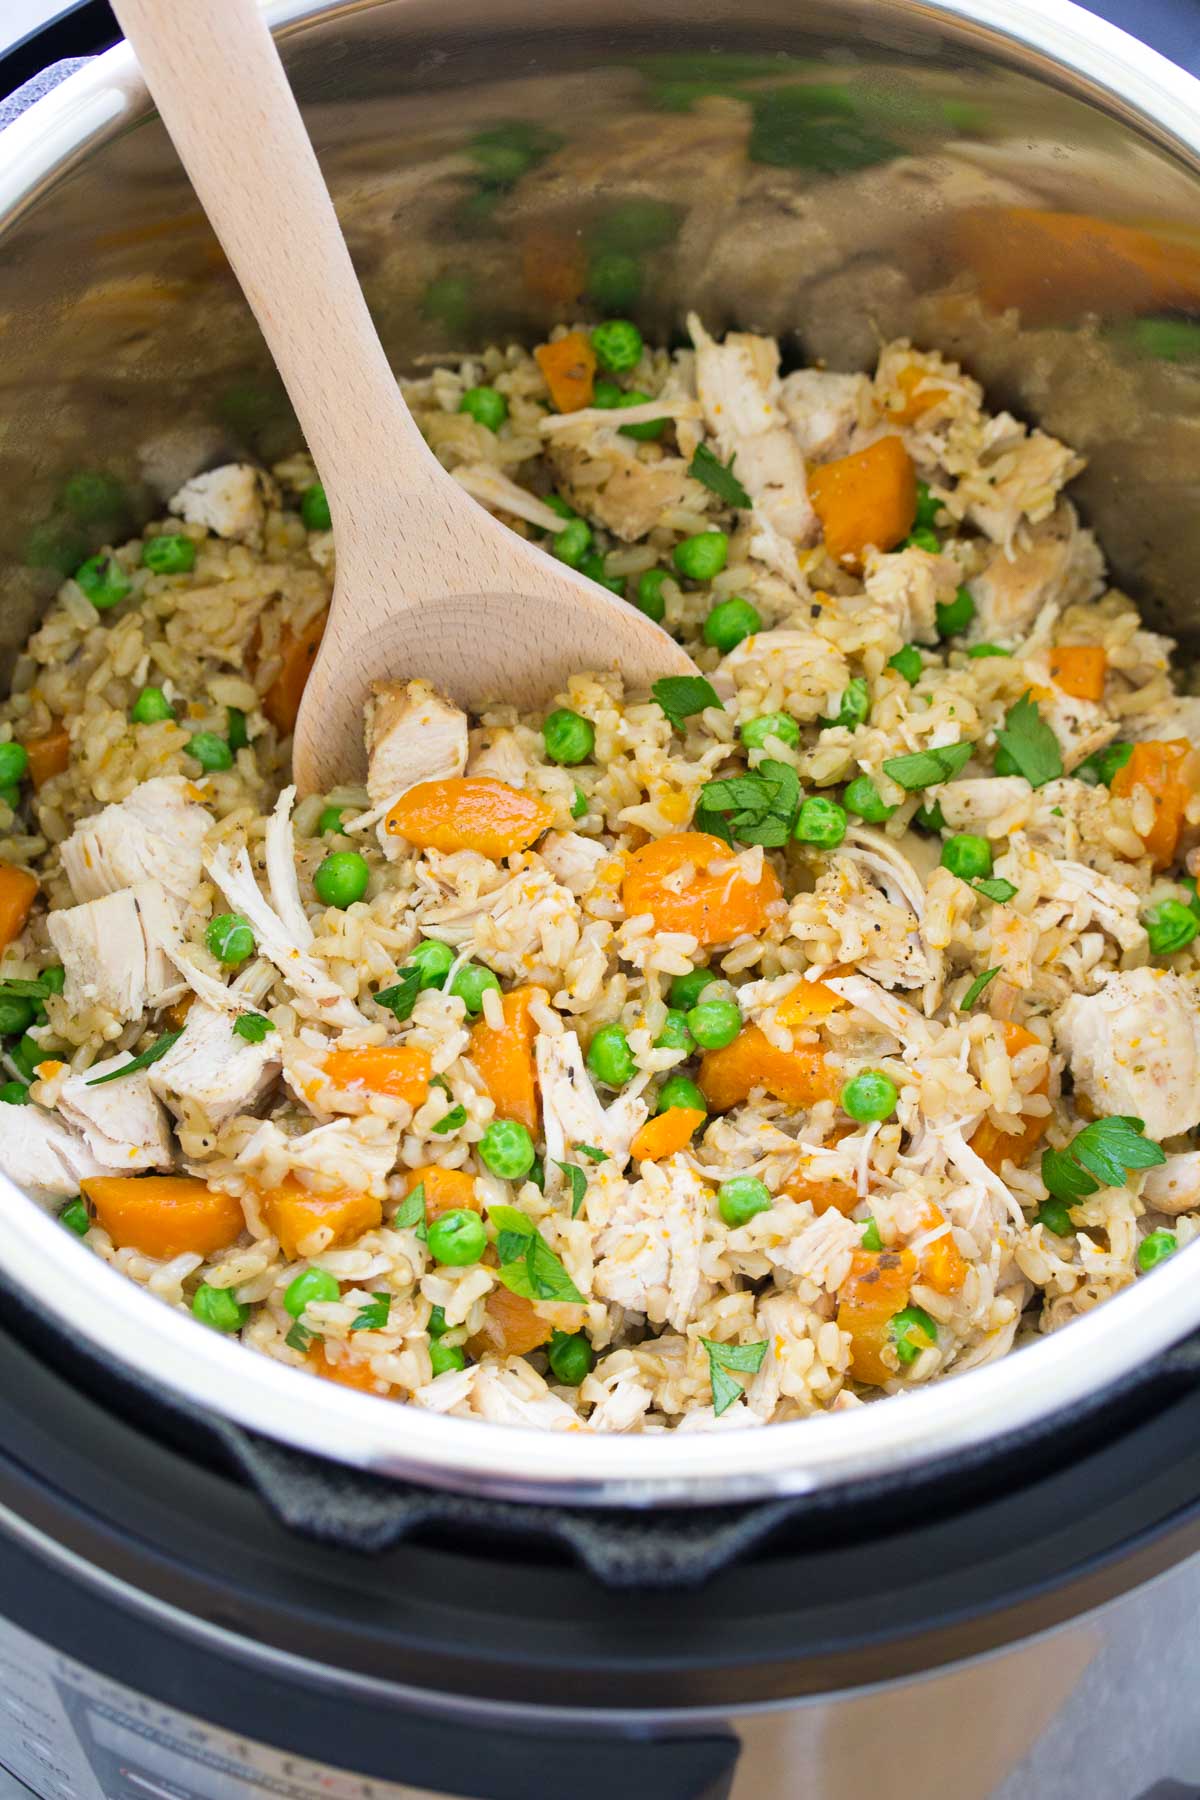 One Pot Brown Rice and Veggies (+ video) - Family Food on the Table